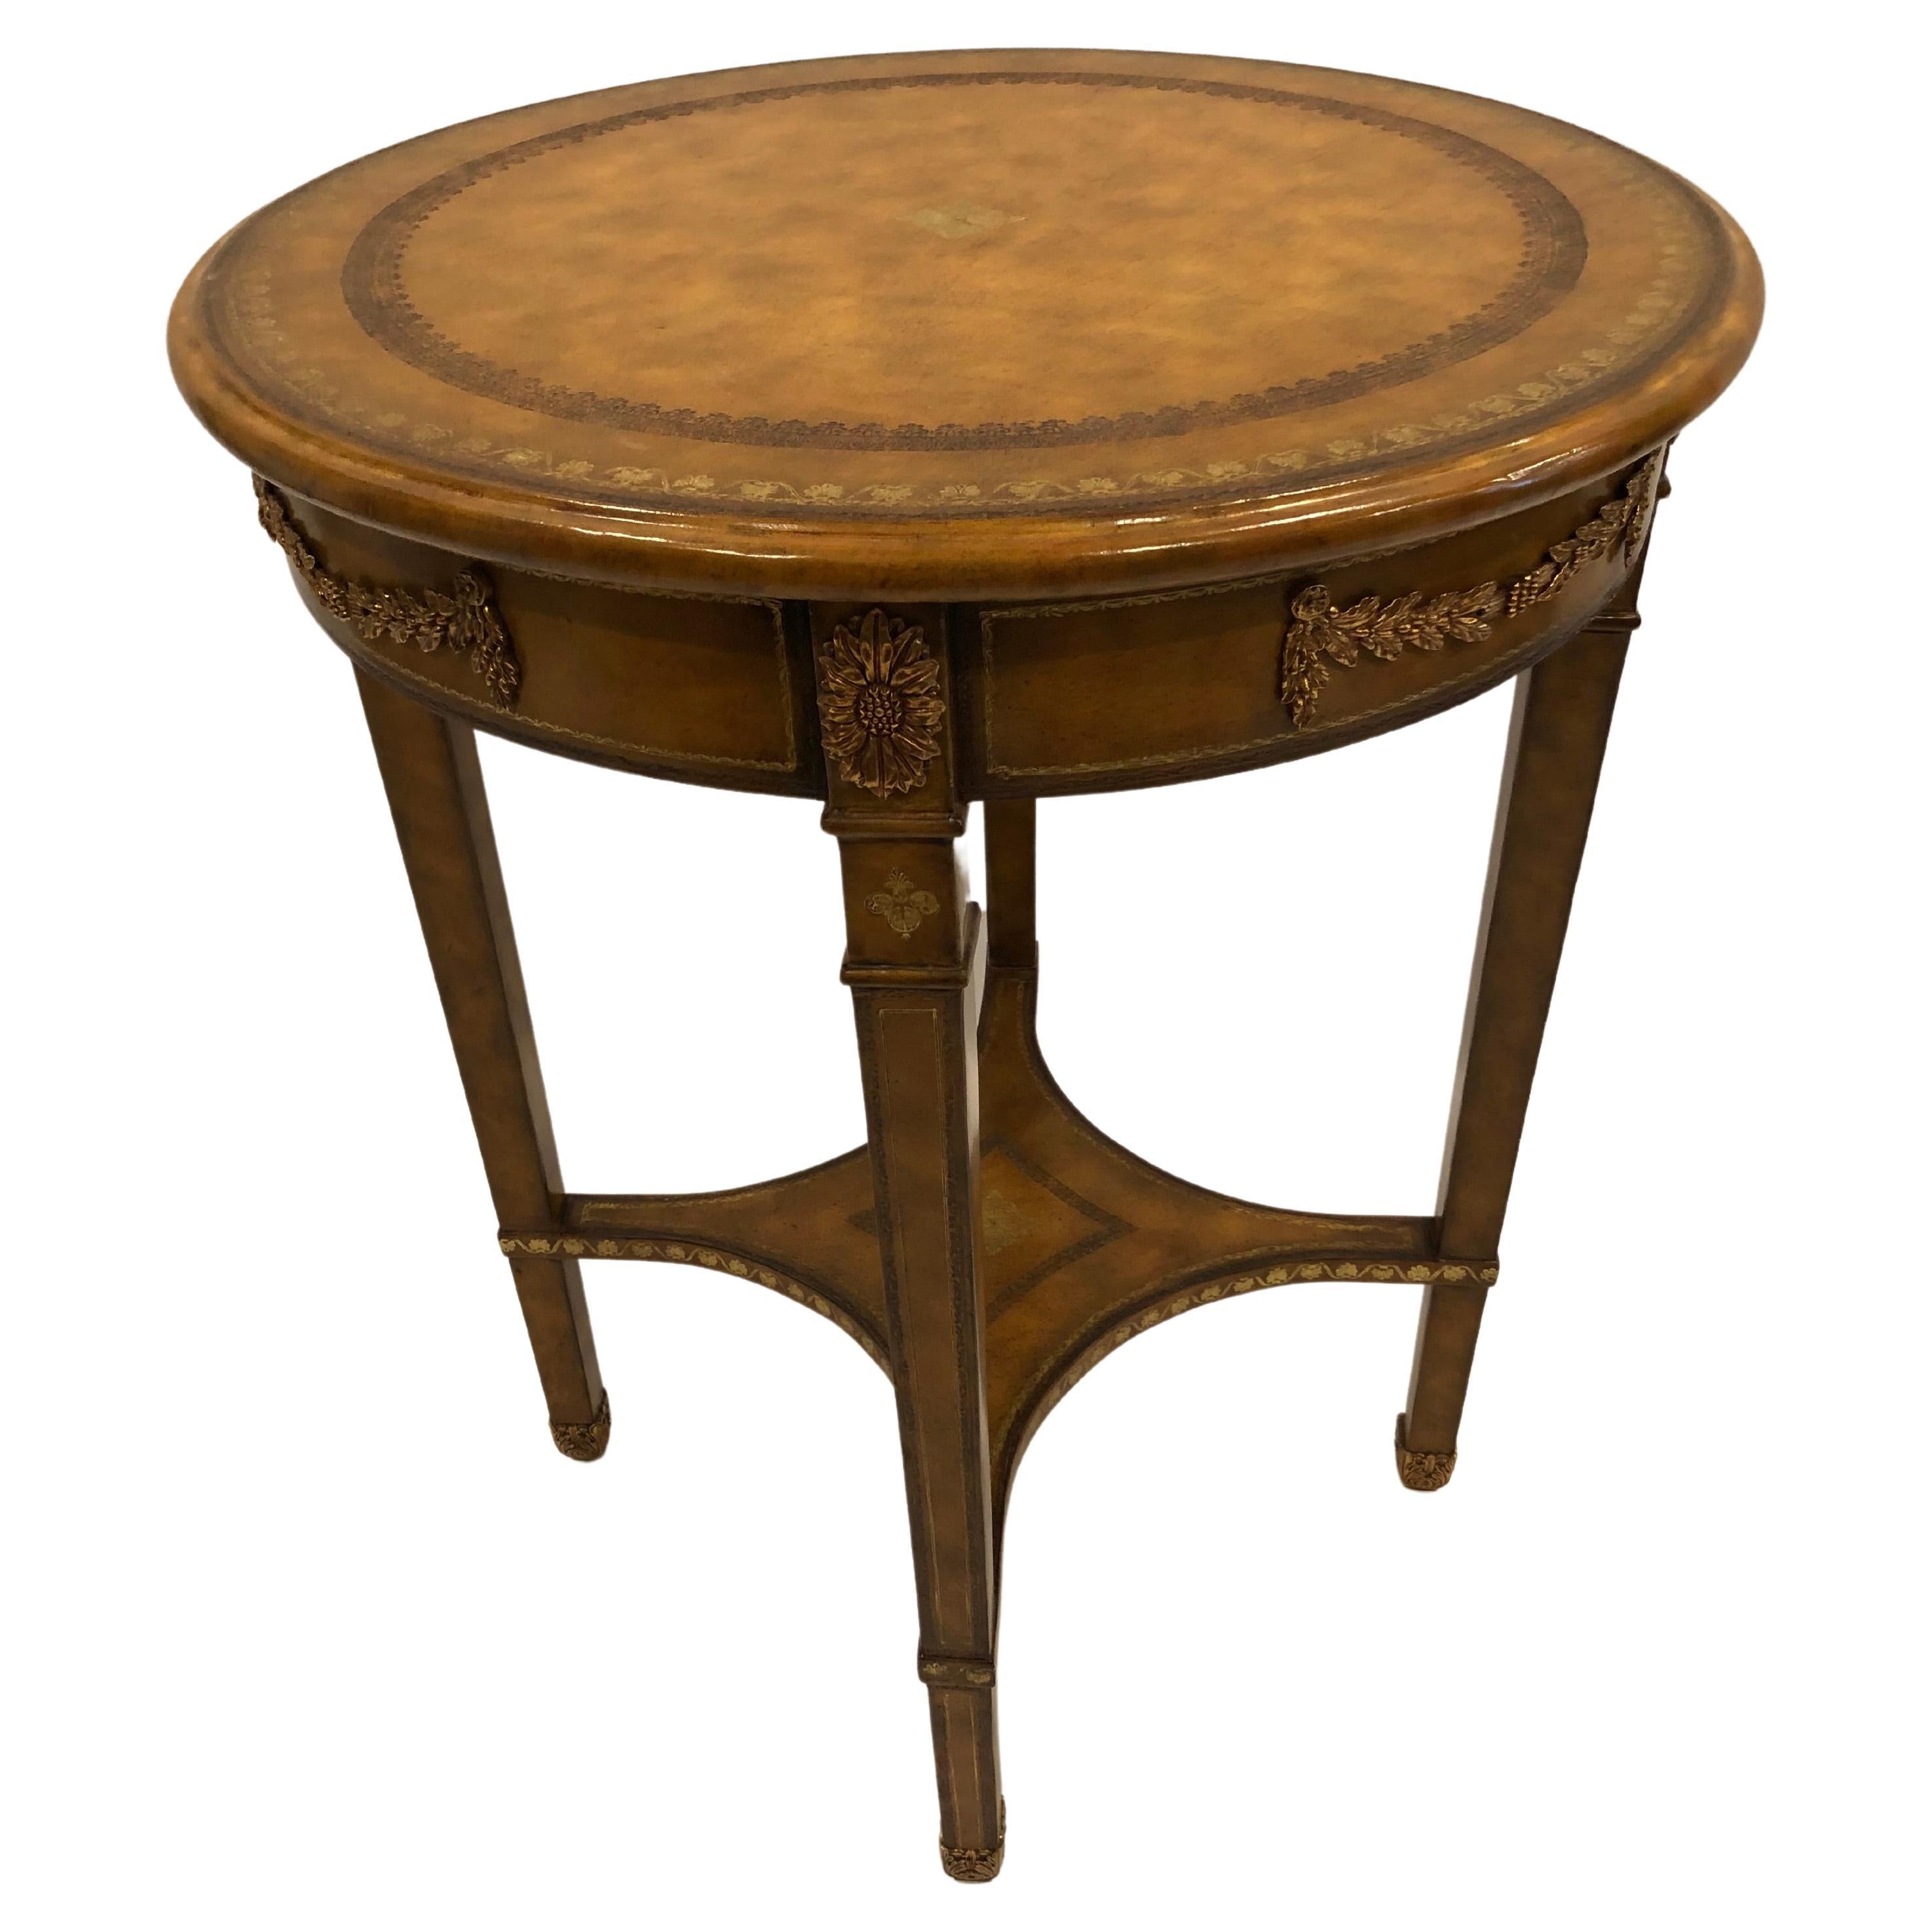 Handsome Round Leather Embossed Side Table by Maitland Smith